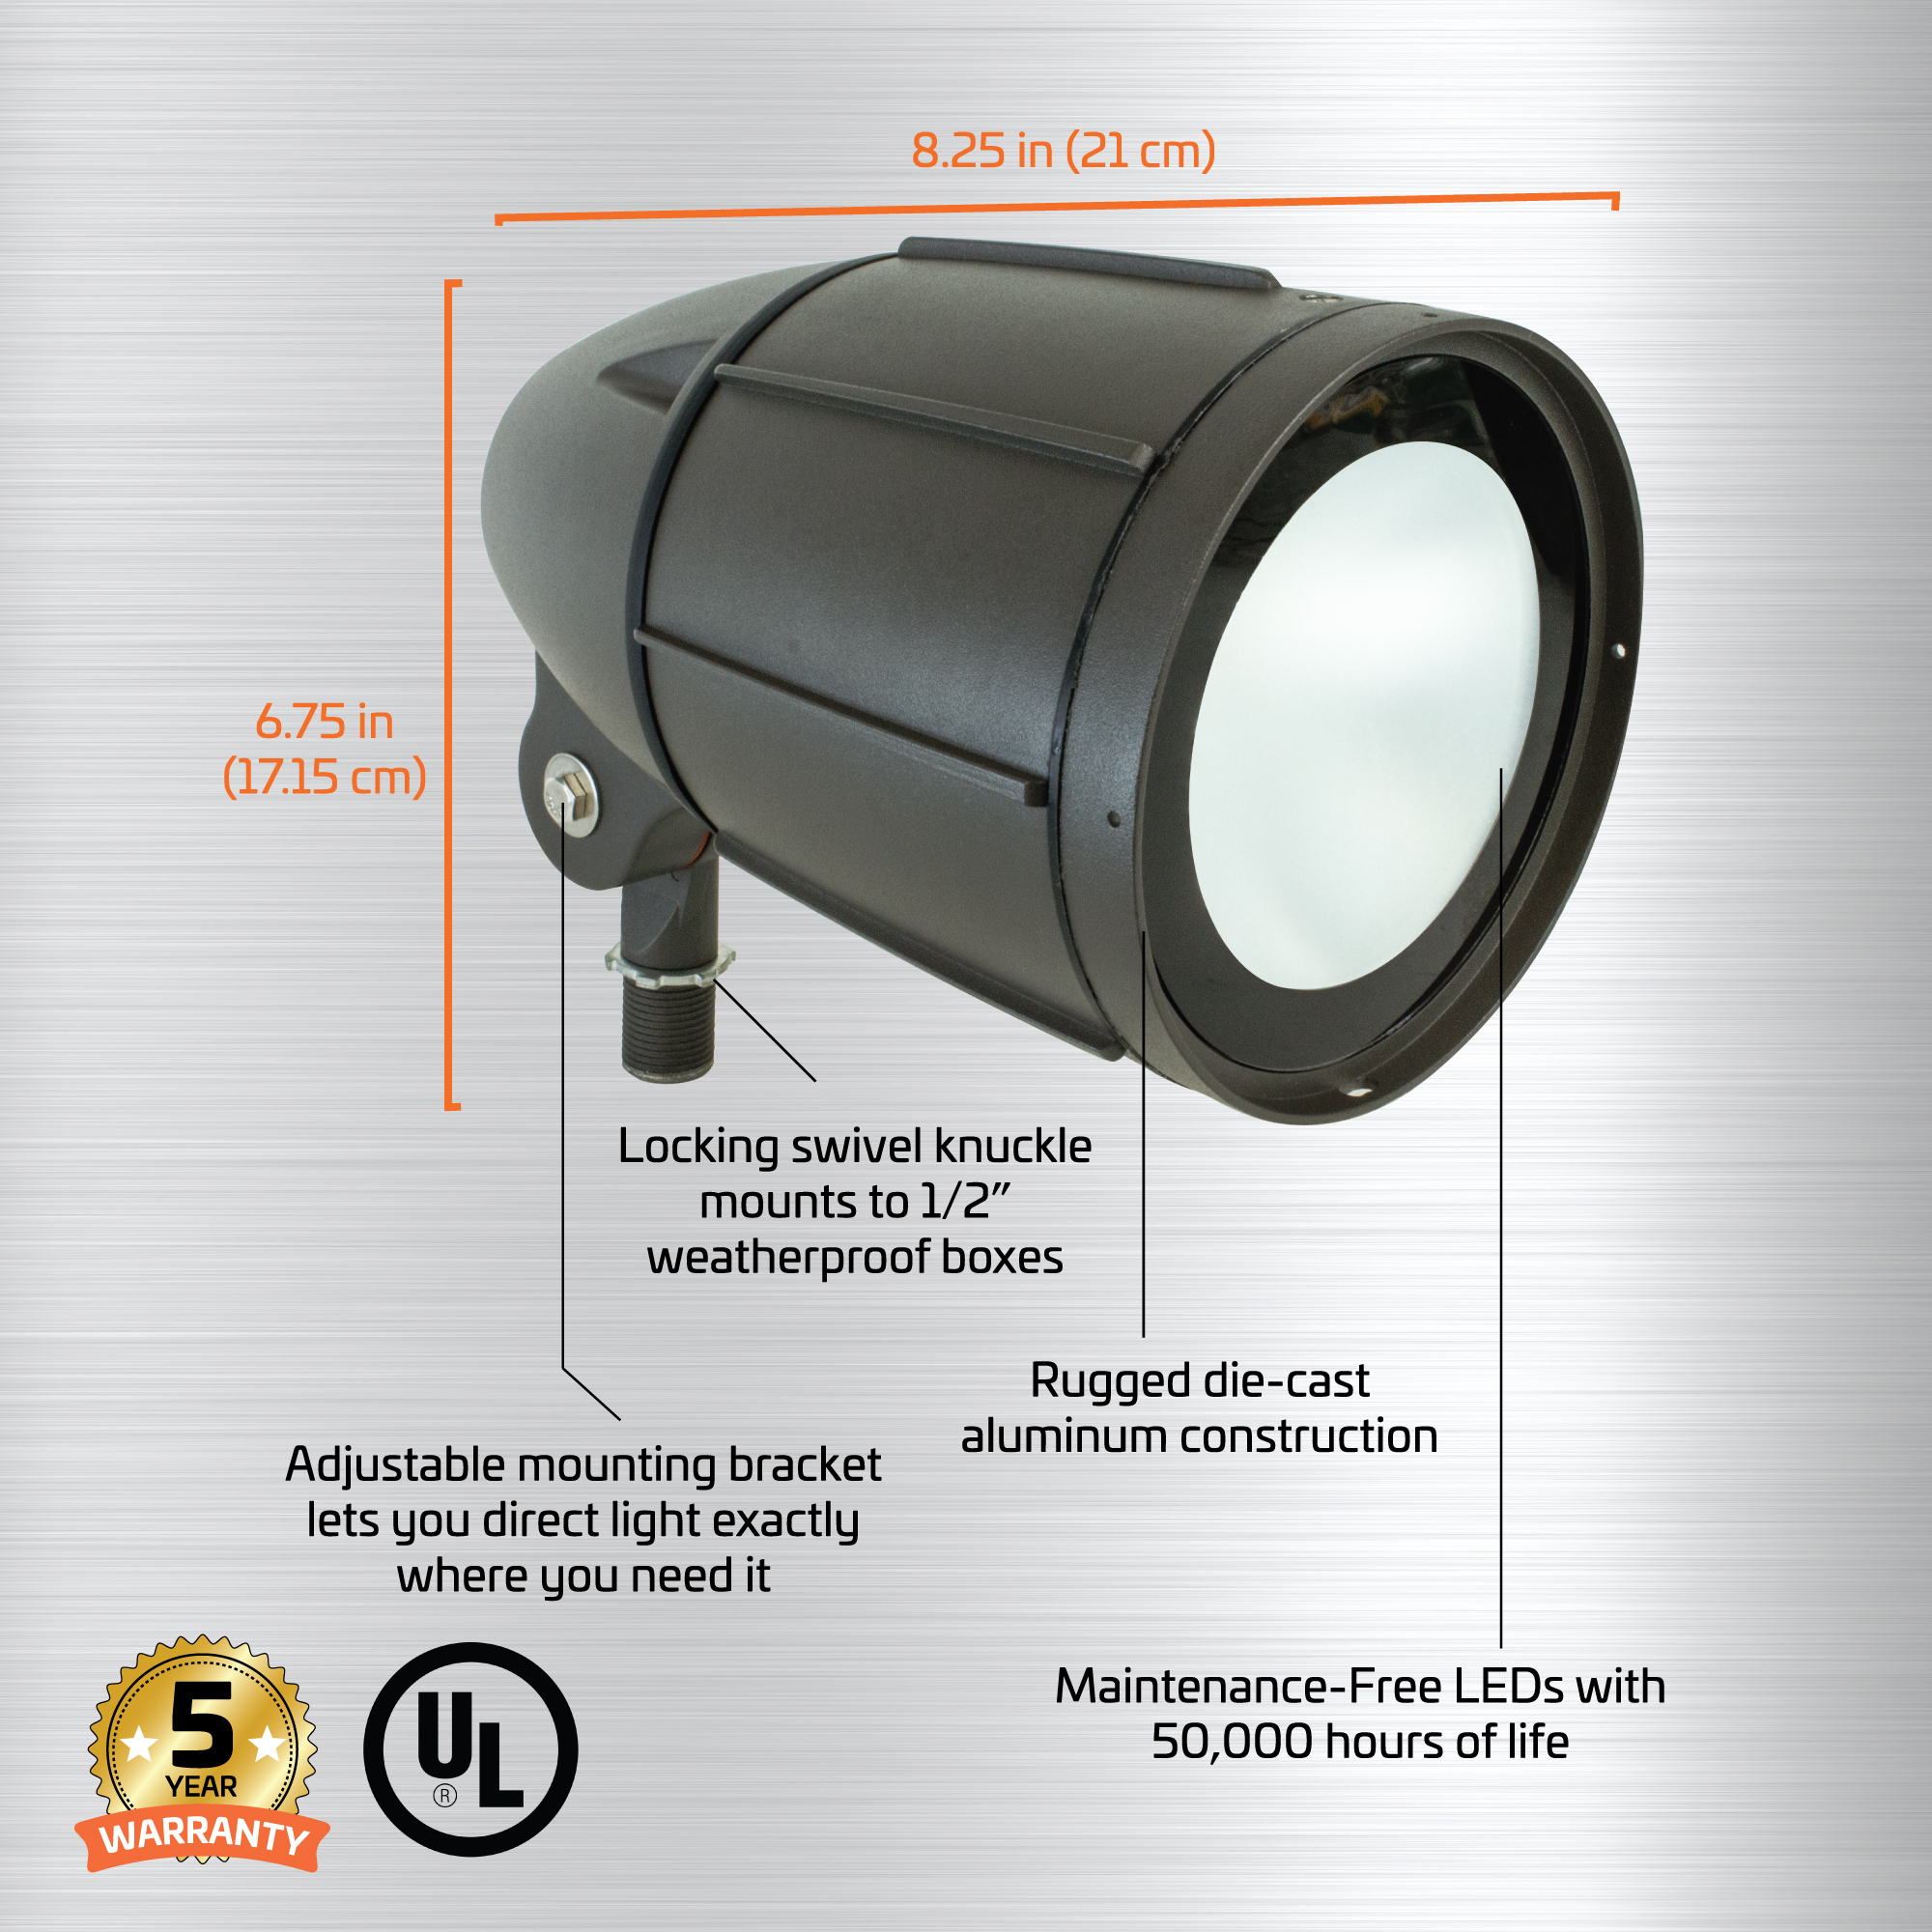 Newhouse Lighting BLF30BRZ 30-Watt Outdoor LED Flood Light, Weatherproof, Bronze. For use in flag pole, flood, backyards, playground, and landscape lighting applications. - image 4 of 6